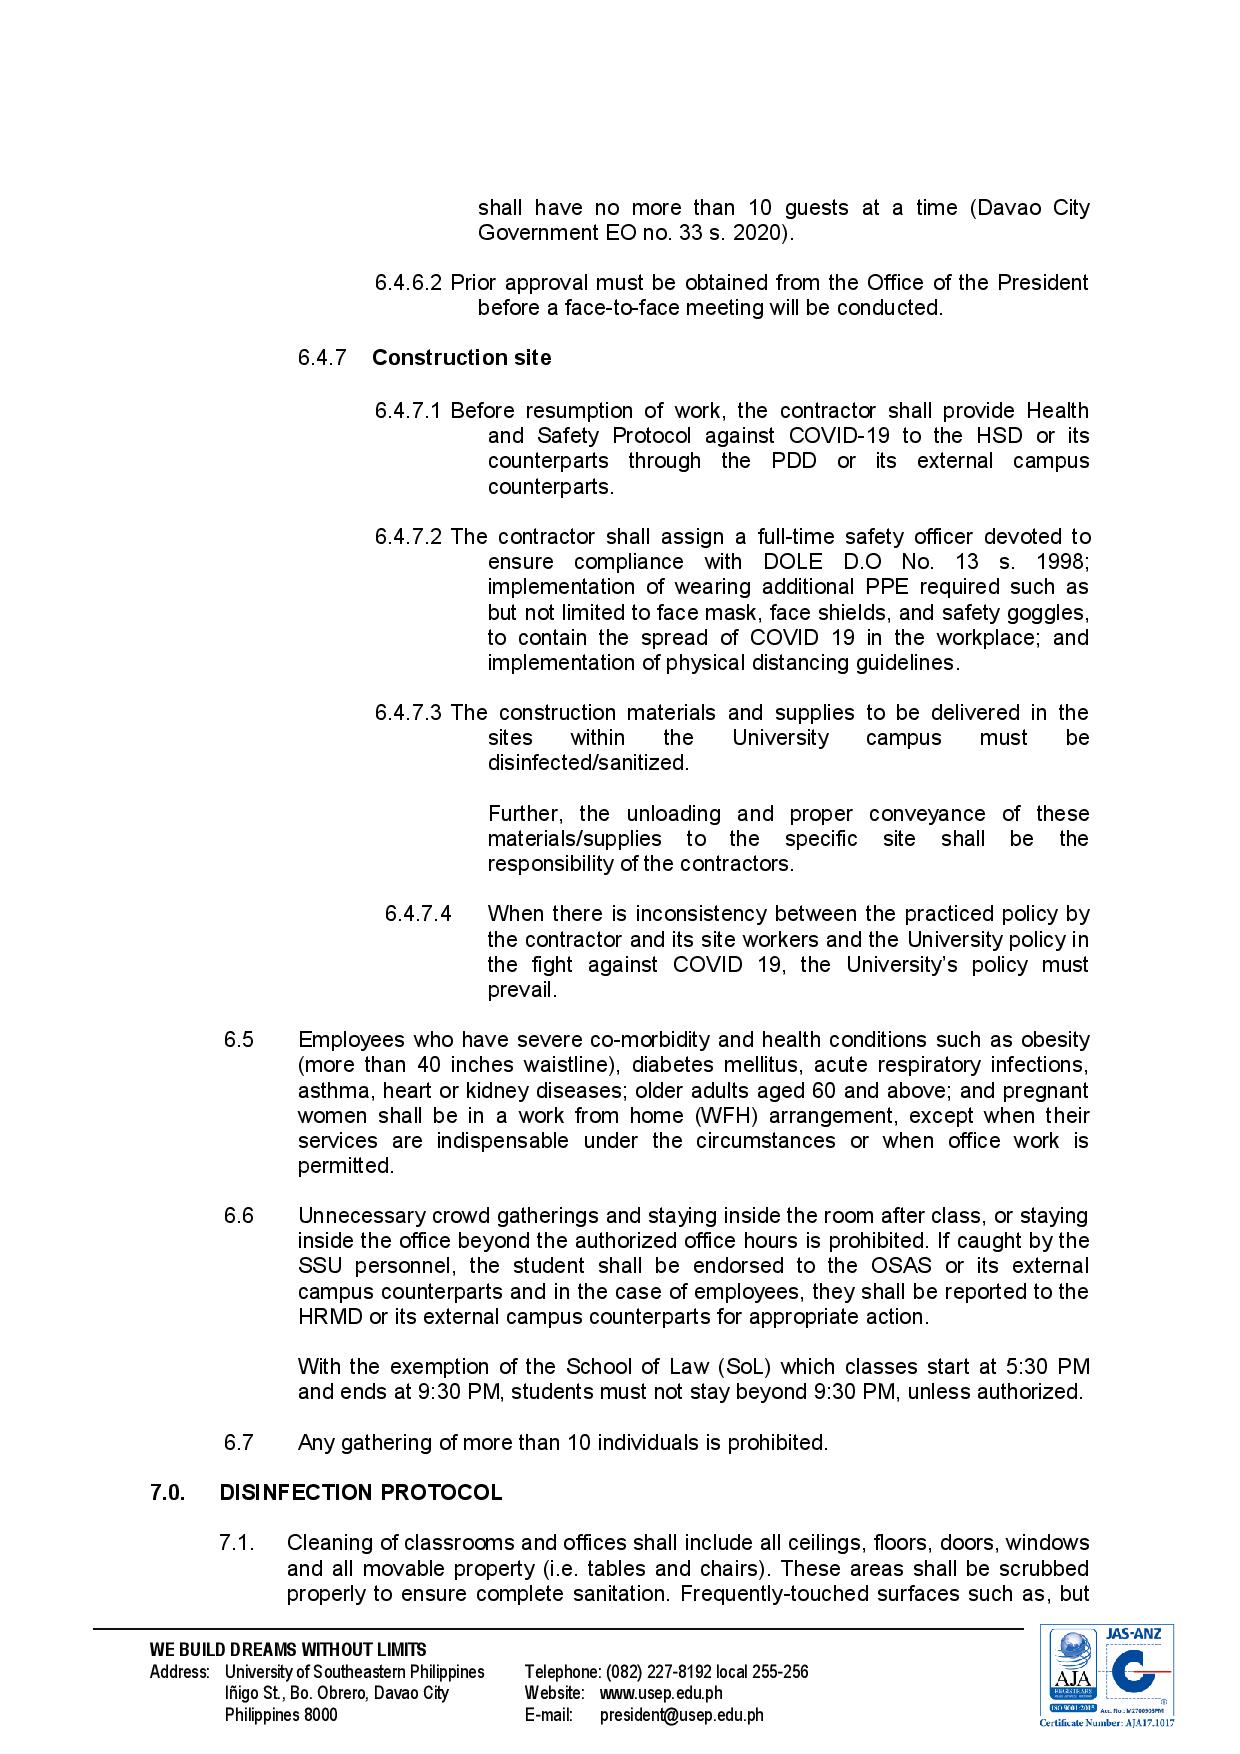 mc-03-s-2020-memorandum-circular-on-administrative-guidelines-upon-resumption-of-work-and-conduct-of-classes-under-the-new-normal-condition-1-page-008